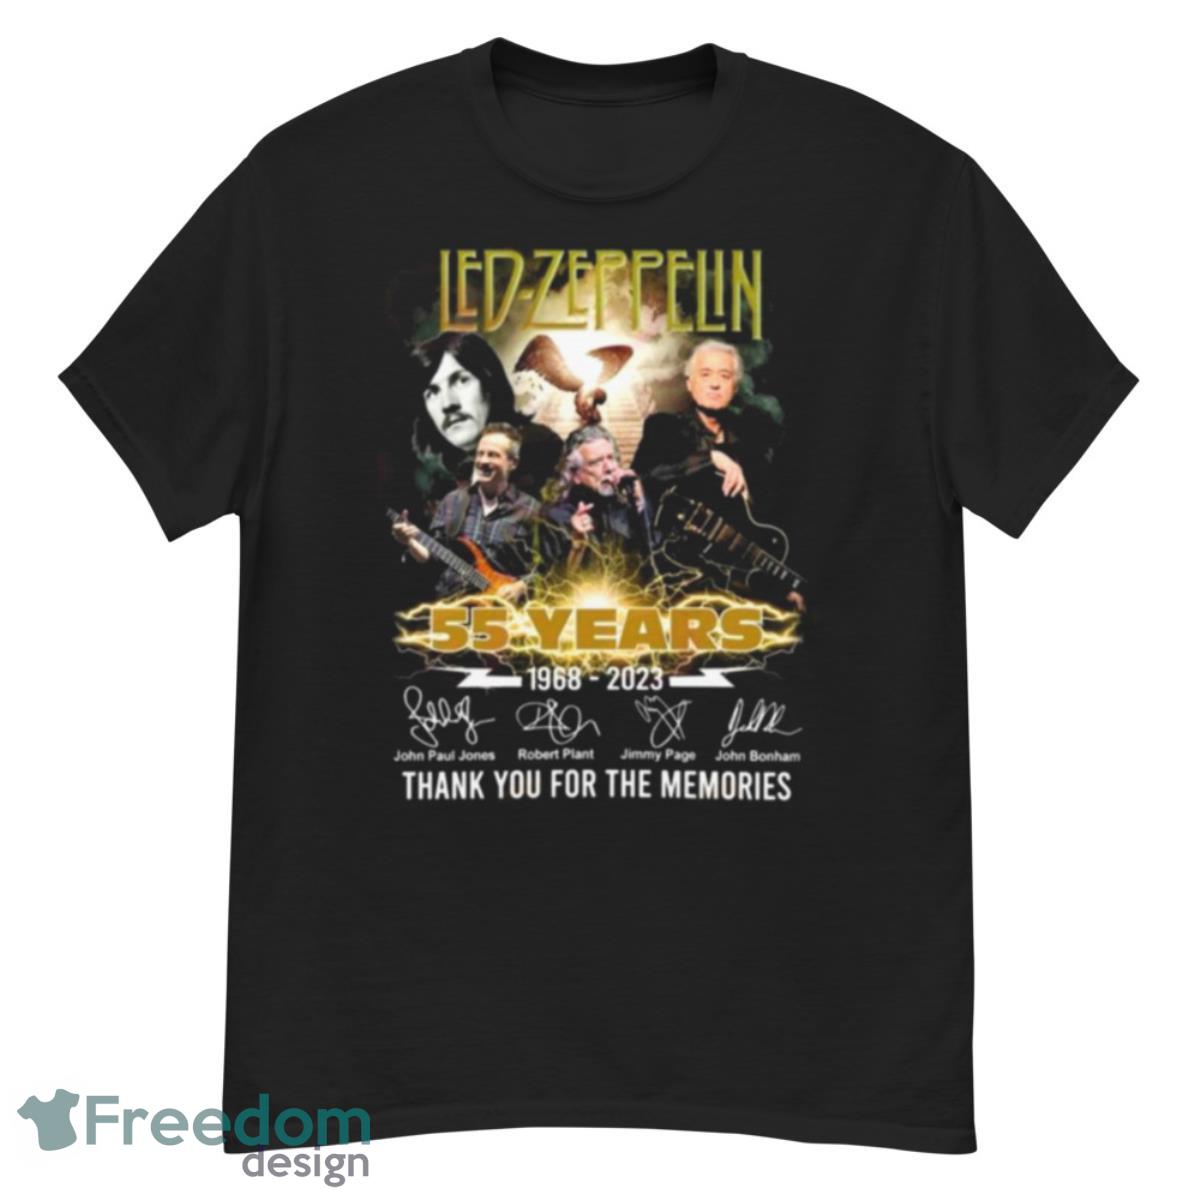 Led Zeppelin 55 Years 1968 – 2023 Thank You For The Memories Signatures Shirt - G500 Men’s Classic T-Shirt